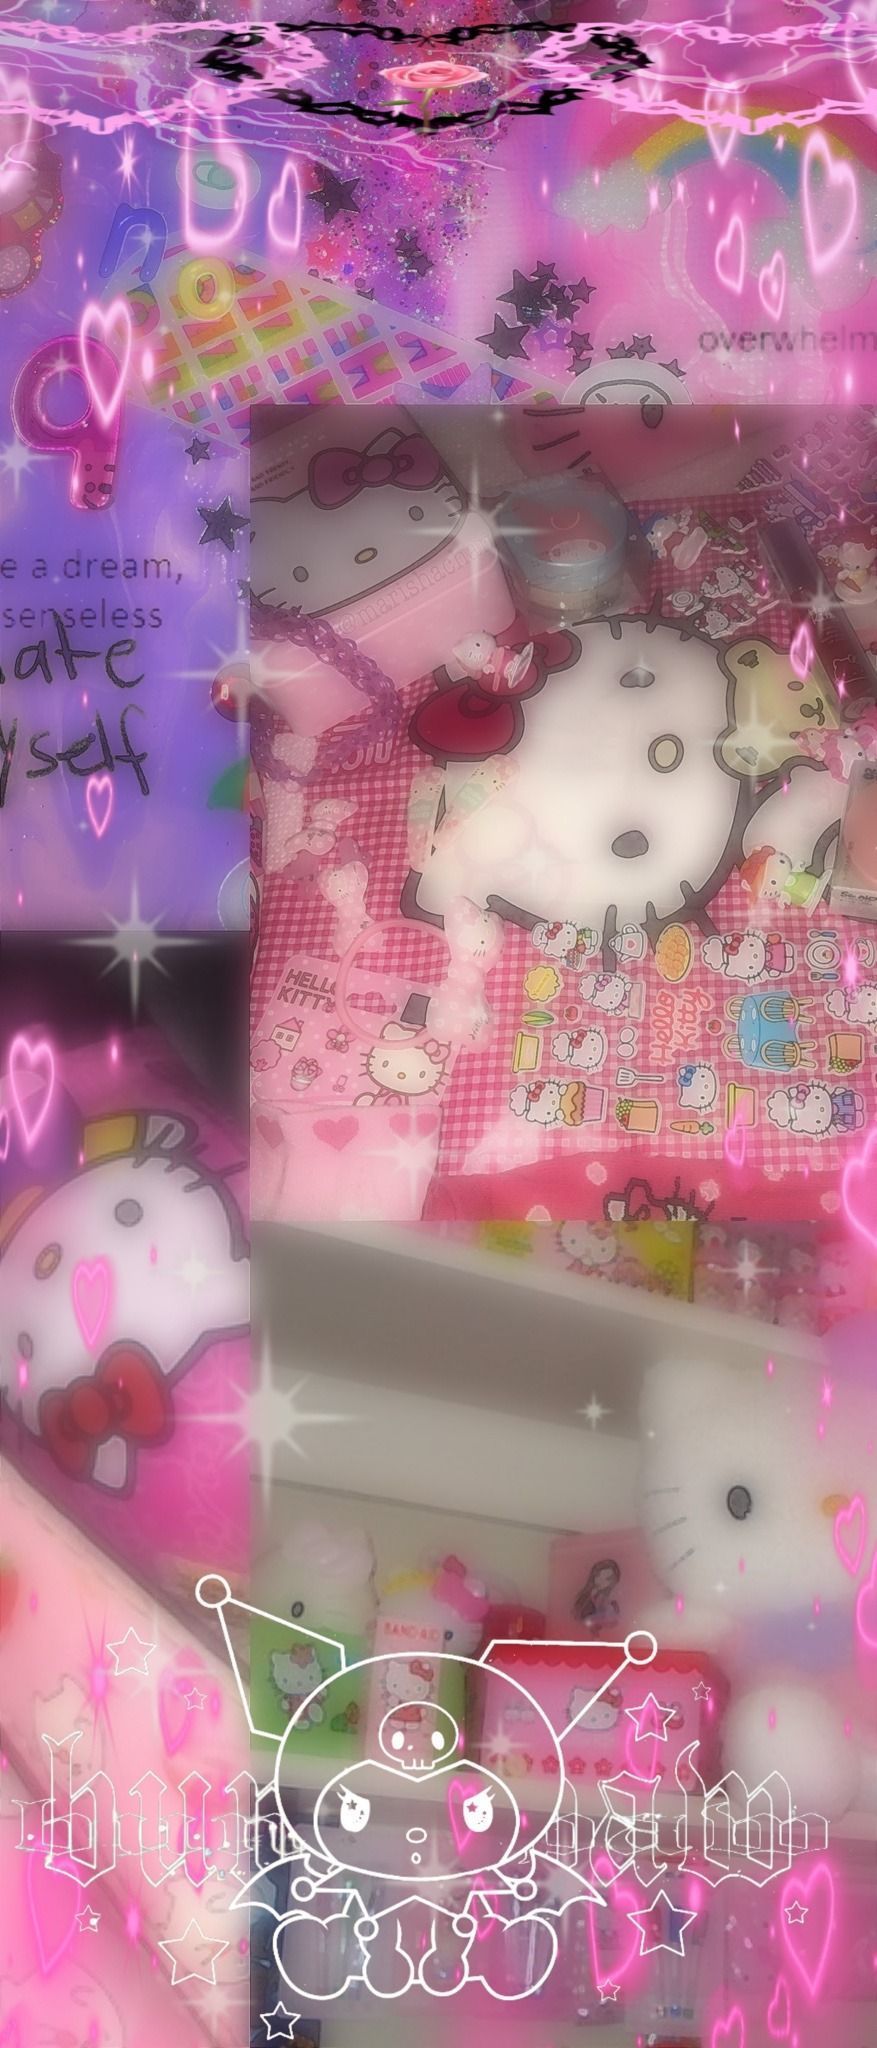 Hello kitty wallpaper and lock screen for mobile devices - Animecore, webcore